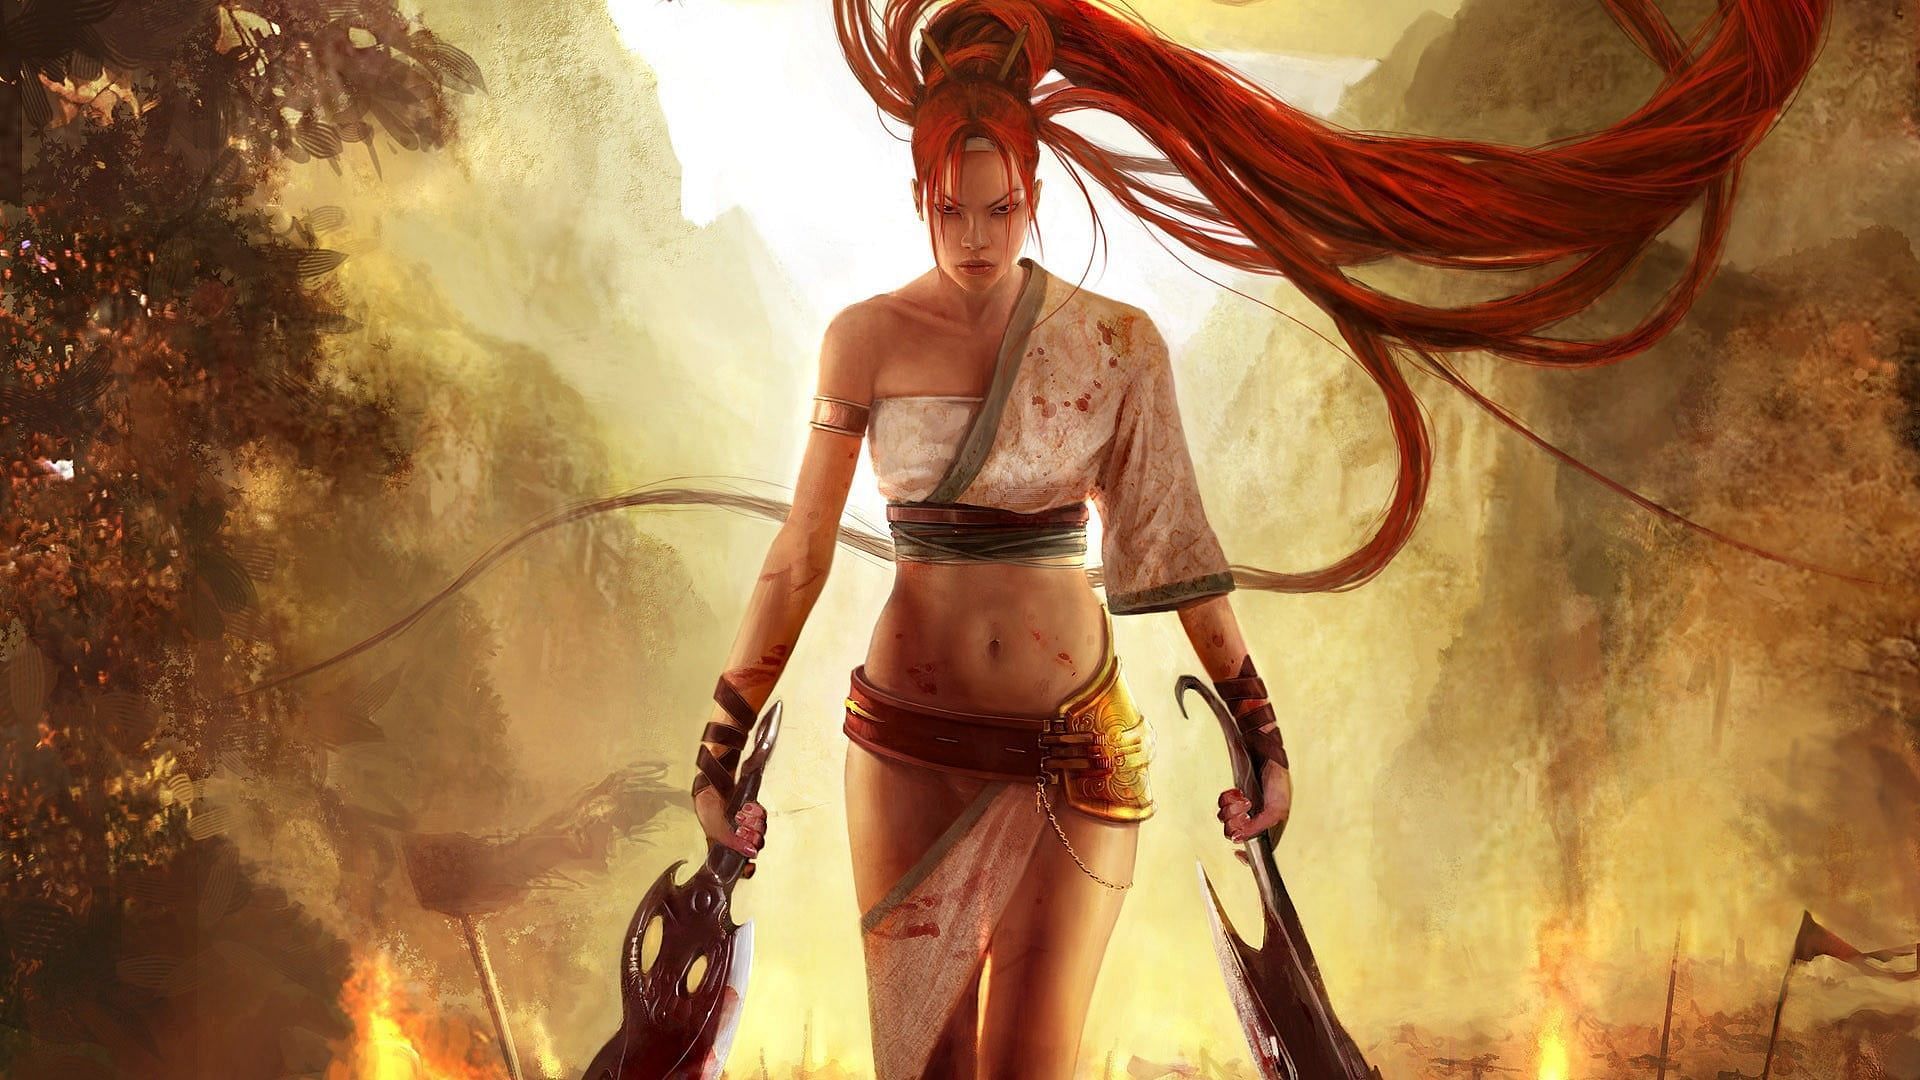 Heavenly Sword deserved another chance with a sequel (image via Wallpaper Flare, Sony Computer Entertainment)